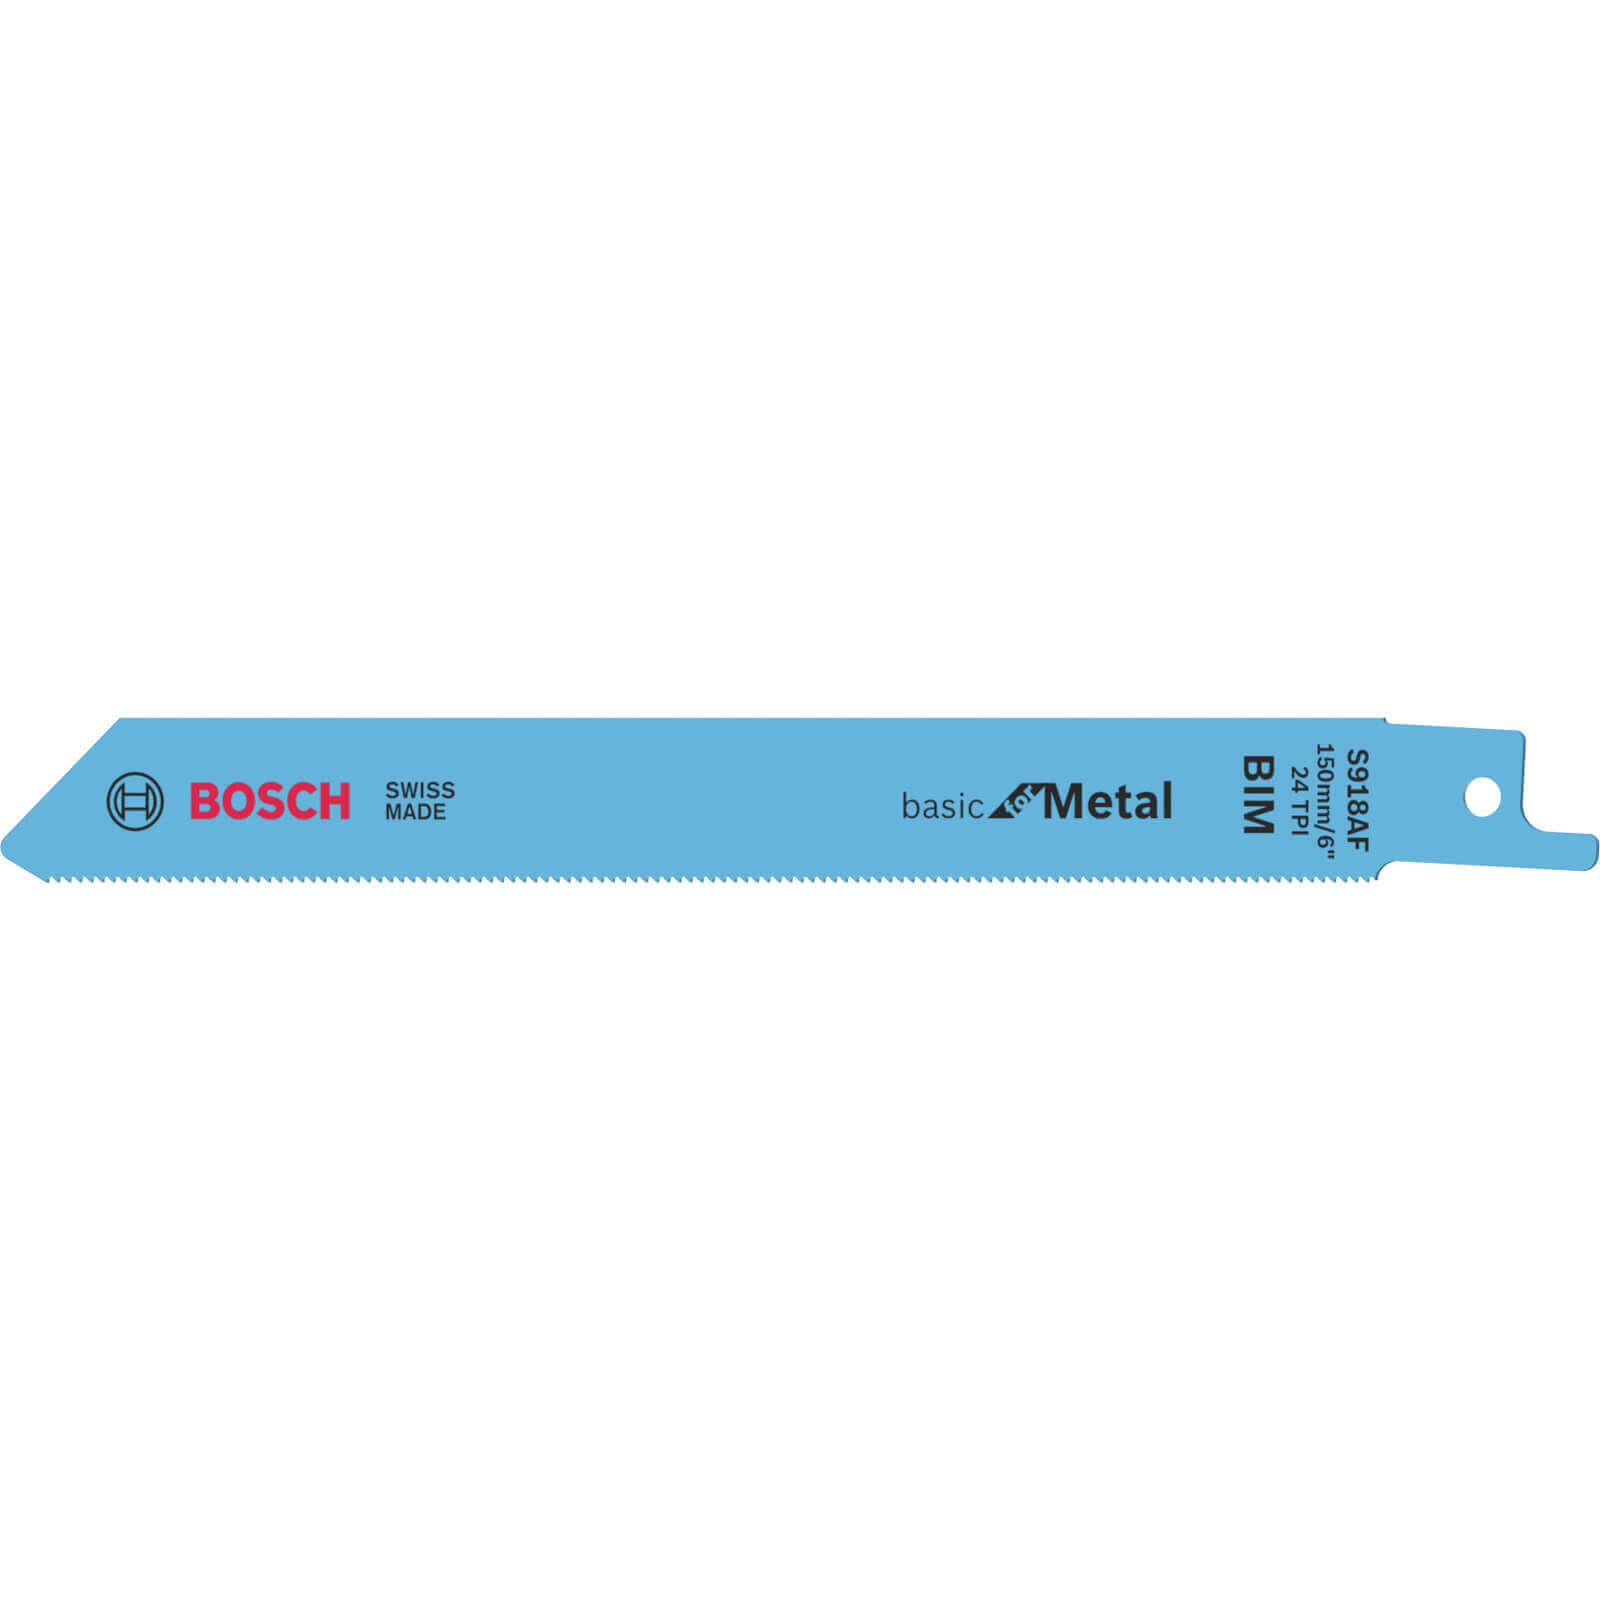 Image of Bosch S918AF Metal Cutting Reciprocating Sabre Saw Blades Pack of 2